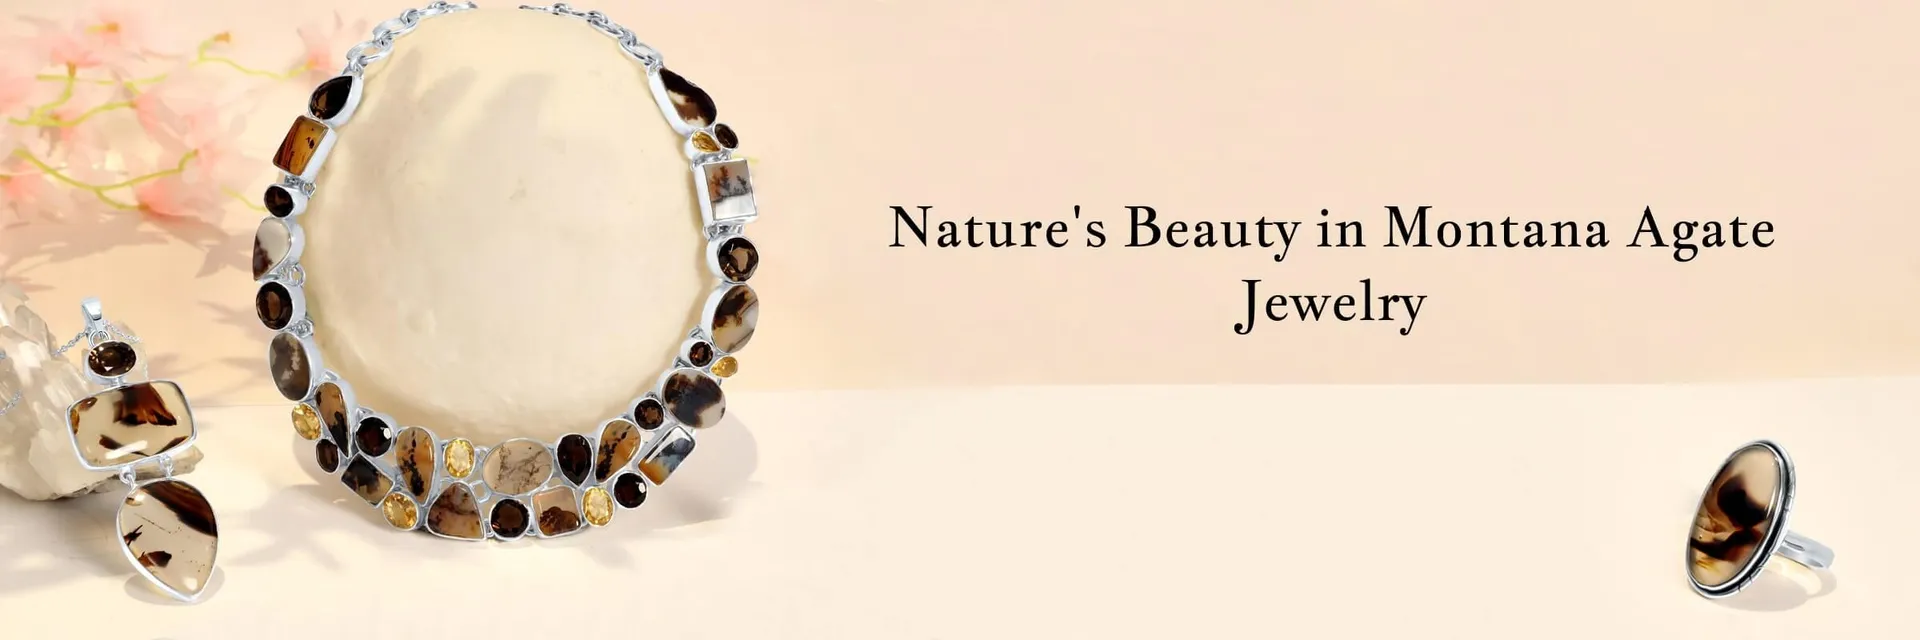 Garden of Gems: Montana Agate Jewelry Inspired by Floral Splendor

Garden of Gems: Montana agate jewelry inspired by the beauty of flowers If you’re like most women, you’re always looking for the perfect gift for your loved ones. And if you’re looking for Designer Jewelry, you’ve come to the right place! We’ve rounded up the best jewelry ideas made with Montana Agate. One of the most beautiful types of agate is the Montana Agate.

Visit@ https://www.rananjayexports.com/blog/montana-agate-jewelry-inspired-by-floral-splendor